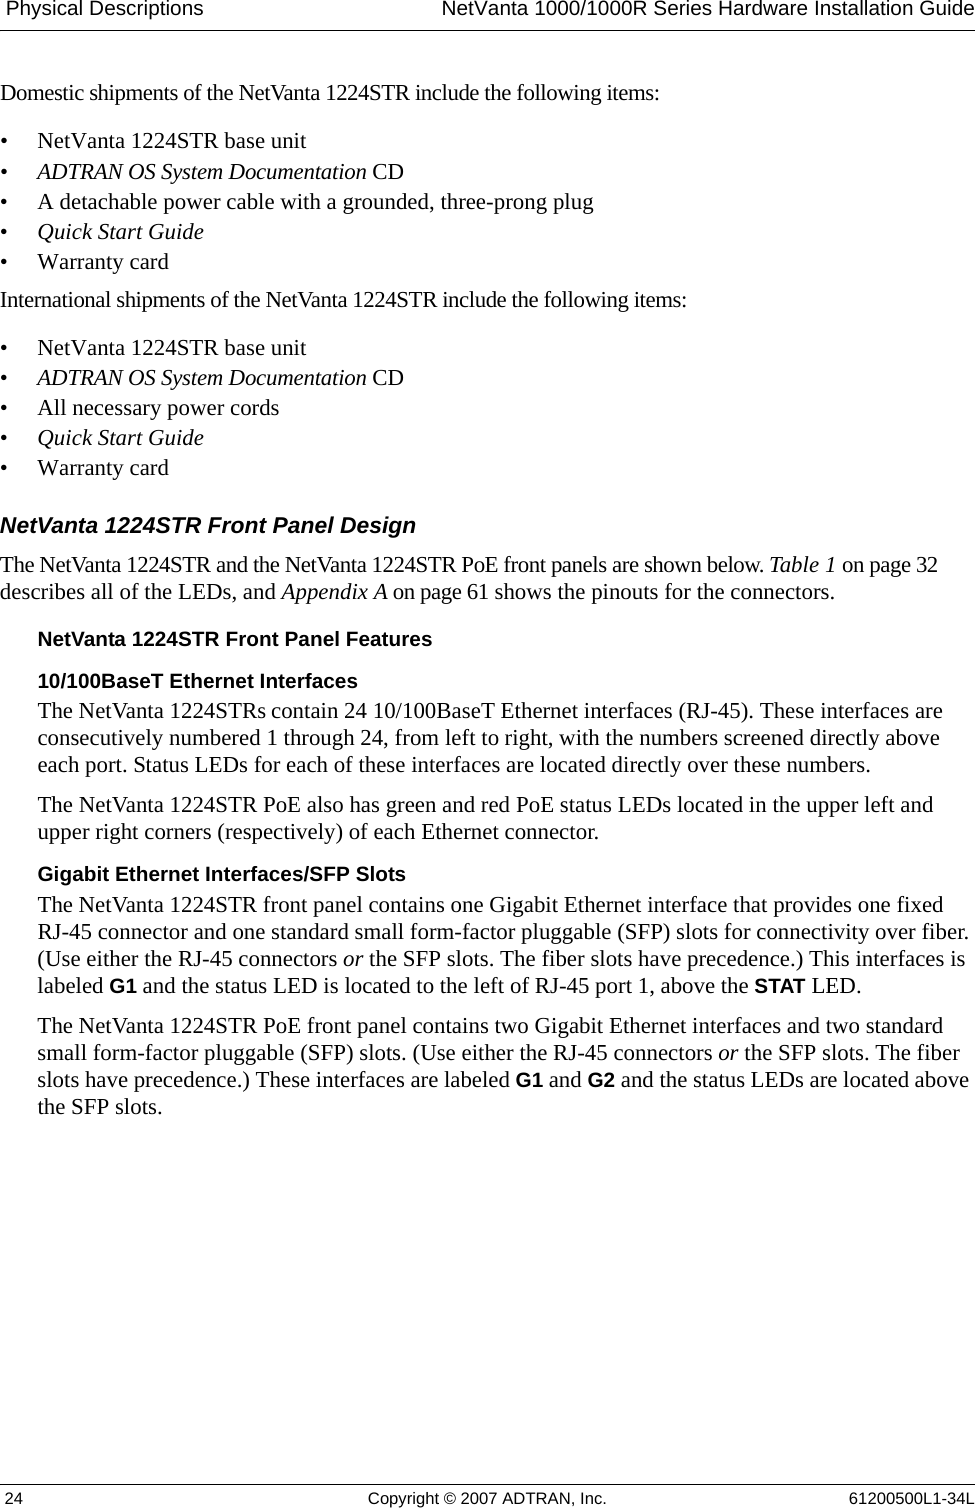  Physical Descriptions NetVanta 1000/1000R Series Hardware Installation Guide 24 Copyright © 2007 ADTRAN, Inc. 61200500L1-34LDomestic shipments of the NetVanta 1224STR include the following items:• NetVanta 1224STR base unit•ADTRAN OS System Documentation CD • A detachable power cable with a grounded, three-prong plug•Quick Start Guide• Warranty cardInternational shipments of the NetVanta 1224STR include the following items:• NetVanta 1224STR base unit•ADTRAN OS System Documentation CD • All necessary power cords•Quick Start Guide• Warranty cardNetVanta 1224STR Front Panel DesignThe NetVanta 1224STR and the NetVanta 1224STR PoE front panels are shown below. Table 1 on page 32 describes all of the LEDs, and Appendix A on page 61 shows the pinouts for the connectors.NetVanta 1224STR Front Panel Features10/100BaseT Ethernet InterfacesThe NetVanta 1224STRs contain 24 10/100BaseT Ethernet interfaces (RJ-45). These interfaces are consecutively numbered 1 through 24, from left to right, with the numbers screened directly above each port. Status LEDs for each of these interfaces are located directly over these numbers. The NetVanta 1224STR PoE also has green and red PoE status LEDs located in the upper left and upper right corners (respectively) of each Ethernet connector. Gigabit Ethernet Interfaces/SFP SlotsThe NetVanta 1224STR front panel contains one Gigabit Ethernet interface that provides one fixed RJ-45 connector and one standard small form-factor pluggable (SFP) slots for connectivity over fiber. (Use either the RJ-45 connectors or the SFP slots. The fiber slots have precedence.) This interfaces is labeled G1 and the status LED is located to the left of RJ-45 port 1, above the STAT LED.The NetVanta 1224STR PoE front panel contains two Gigabit Ethernet interfaces and two standard small form-factor pluggable (SFP) slots. (Use either the RJ-45 connectors or the SFP slots. The fiber slots have precedence.) These interfaces are labeled G1 and G2 and the status LEDs are located above the SFP slots. 